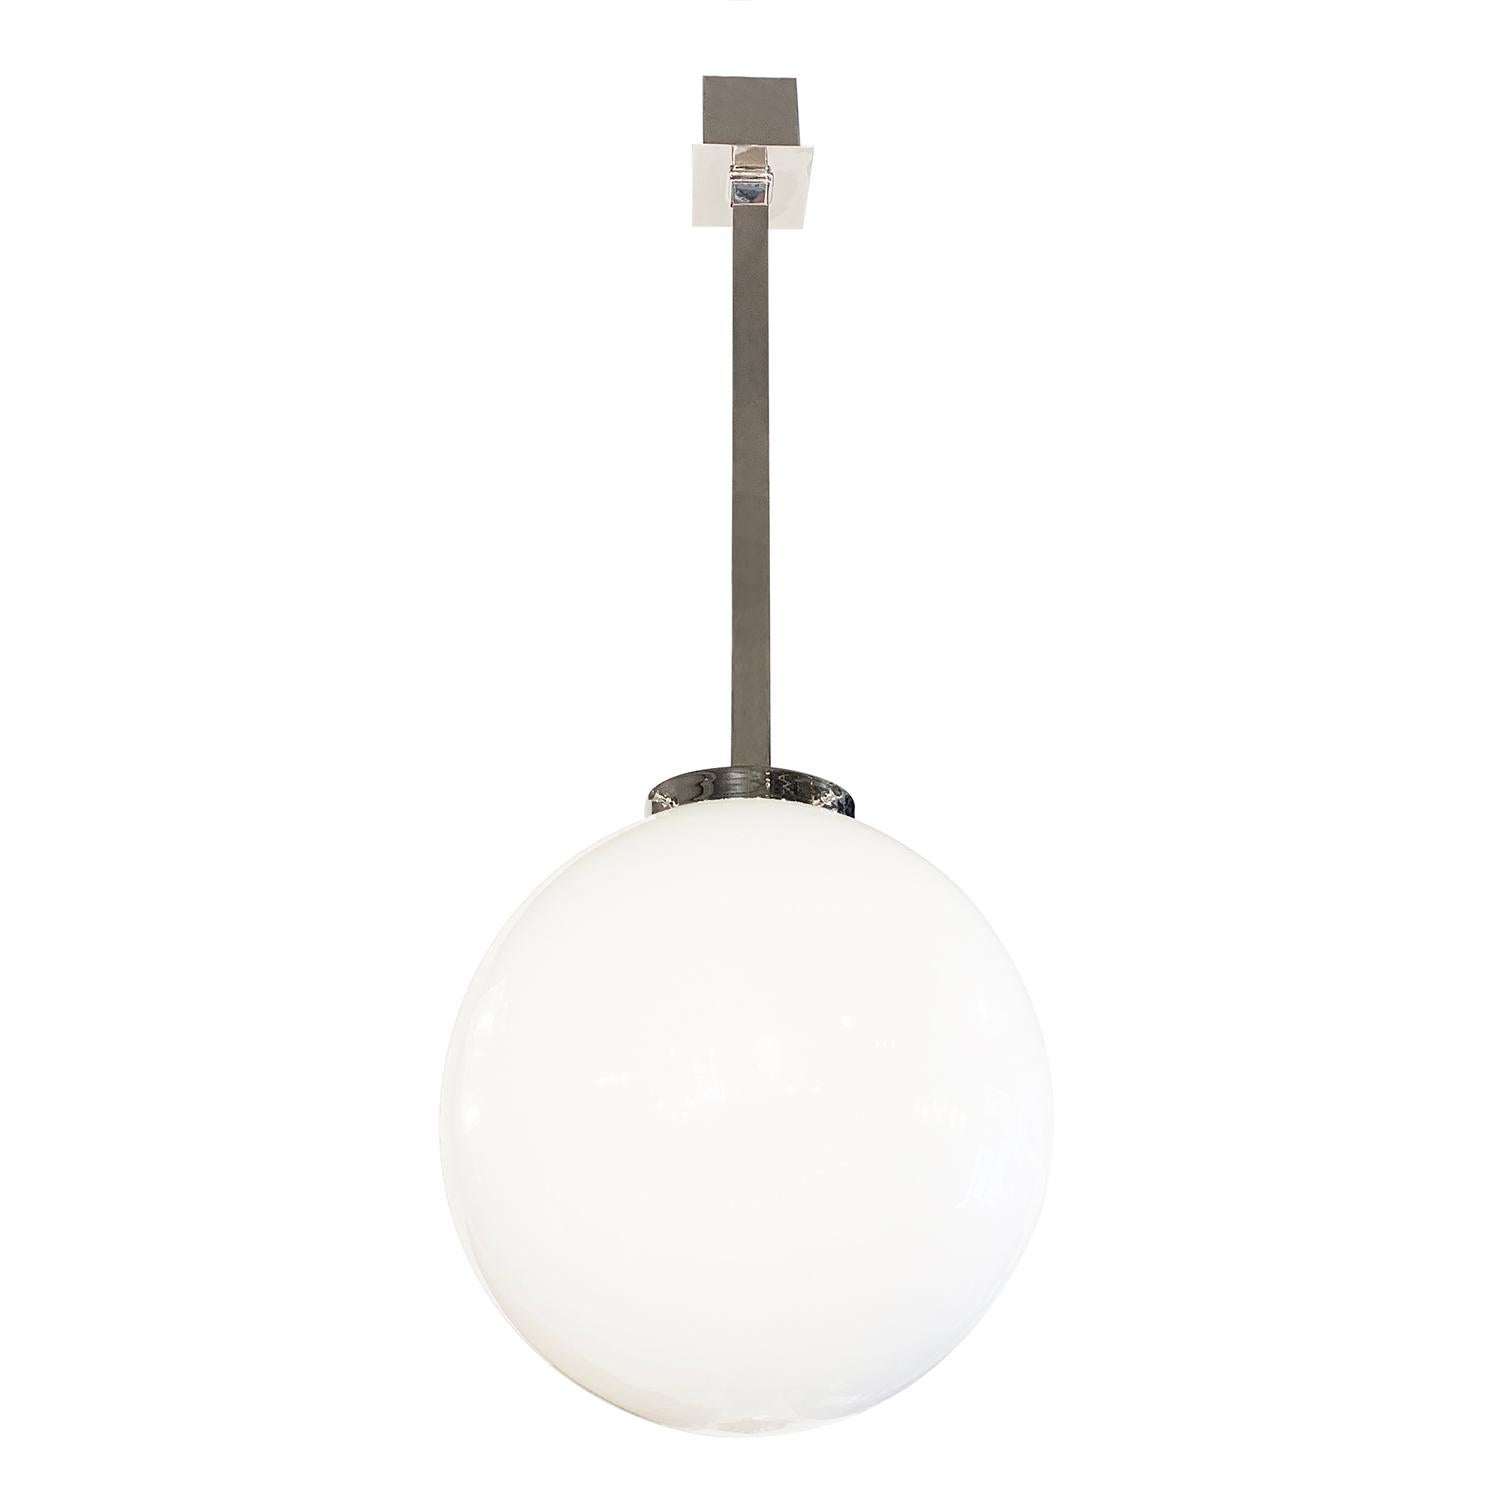 A French executed ceiling light fixture with a white milk colored glass bulb and a square rod in nickel. The vintage Art Deco pendant is in good condition, featuring a one light socket. The wires have been renewed. Wear consistent with age and use.